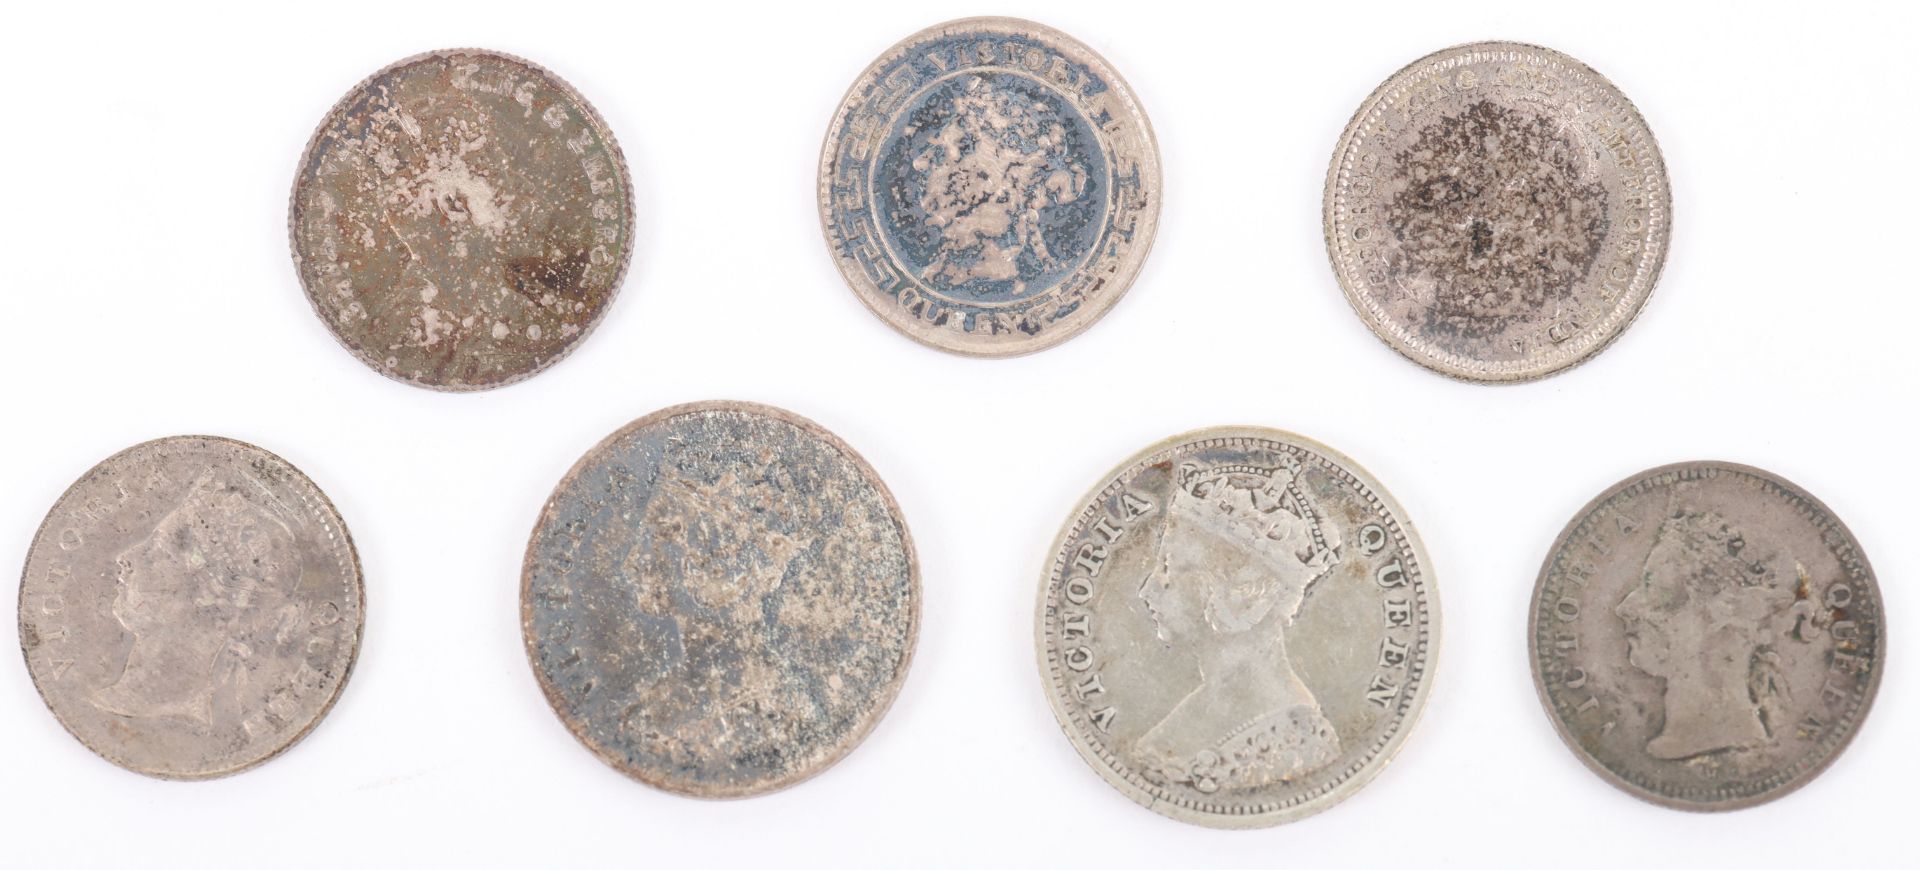 British Colonies, Victoria (1837-1901), Hong Kong, 10 Cents 1898 and 1899, 5 Cents 1899 and 1900, 19